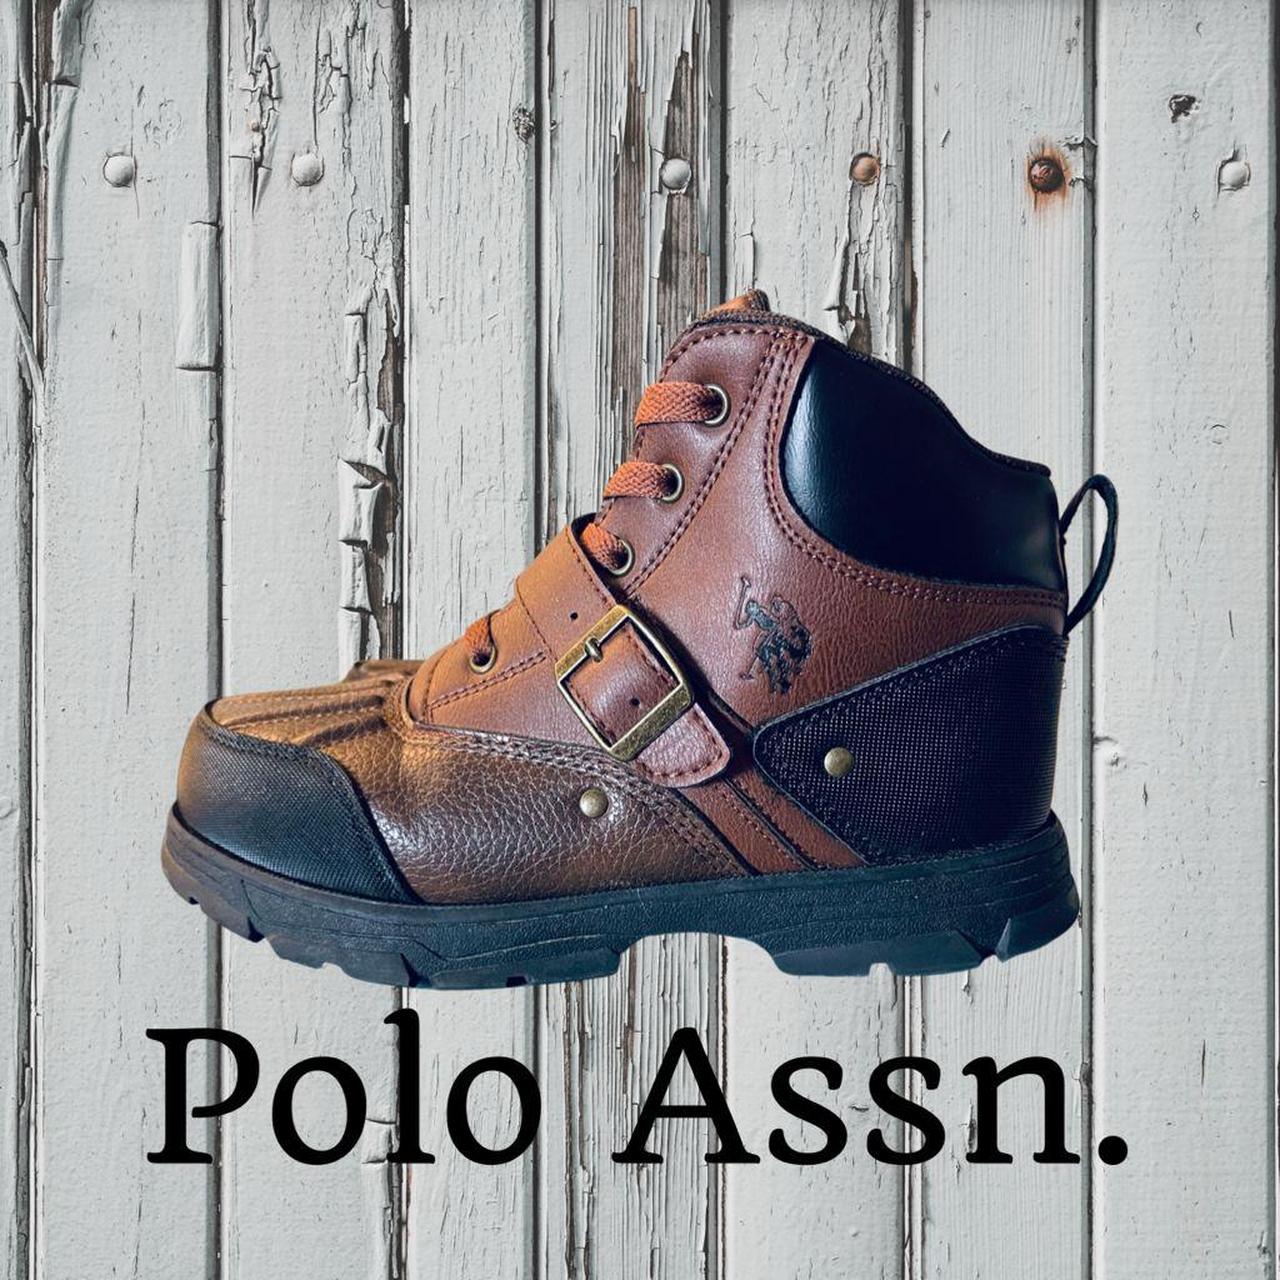 U.S. Polo Assn. Black and Brown Boots